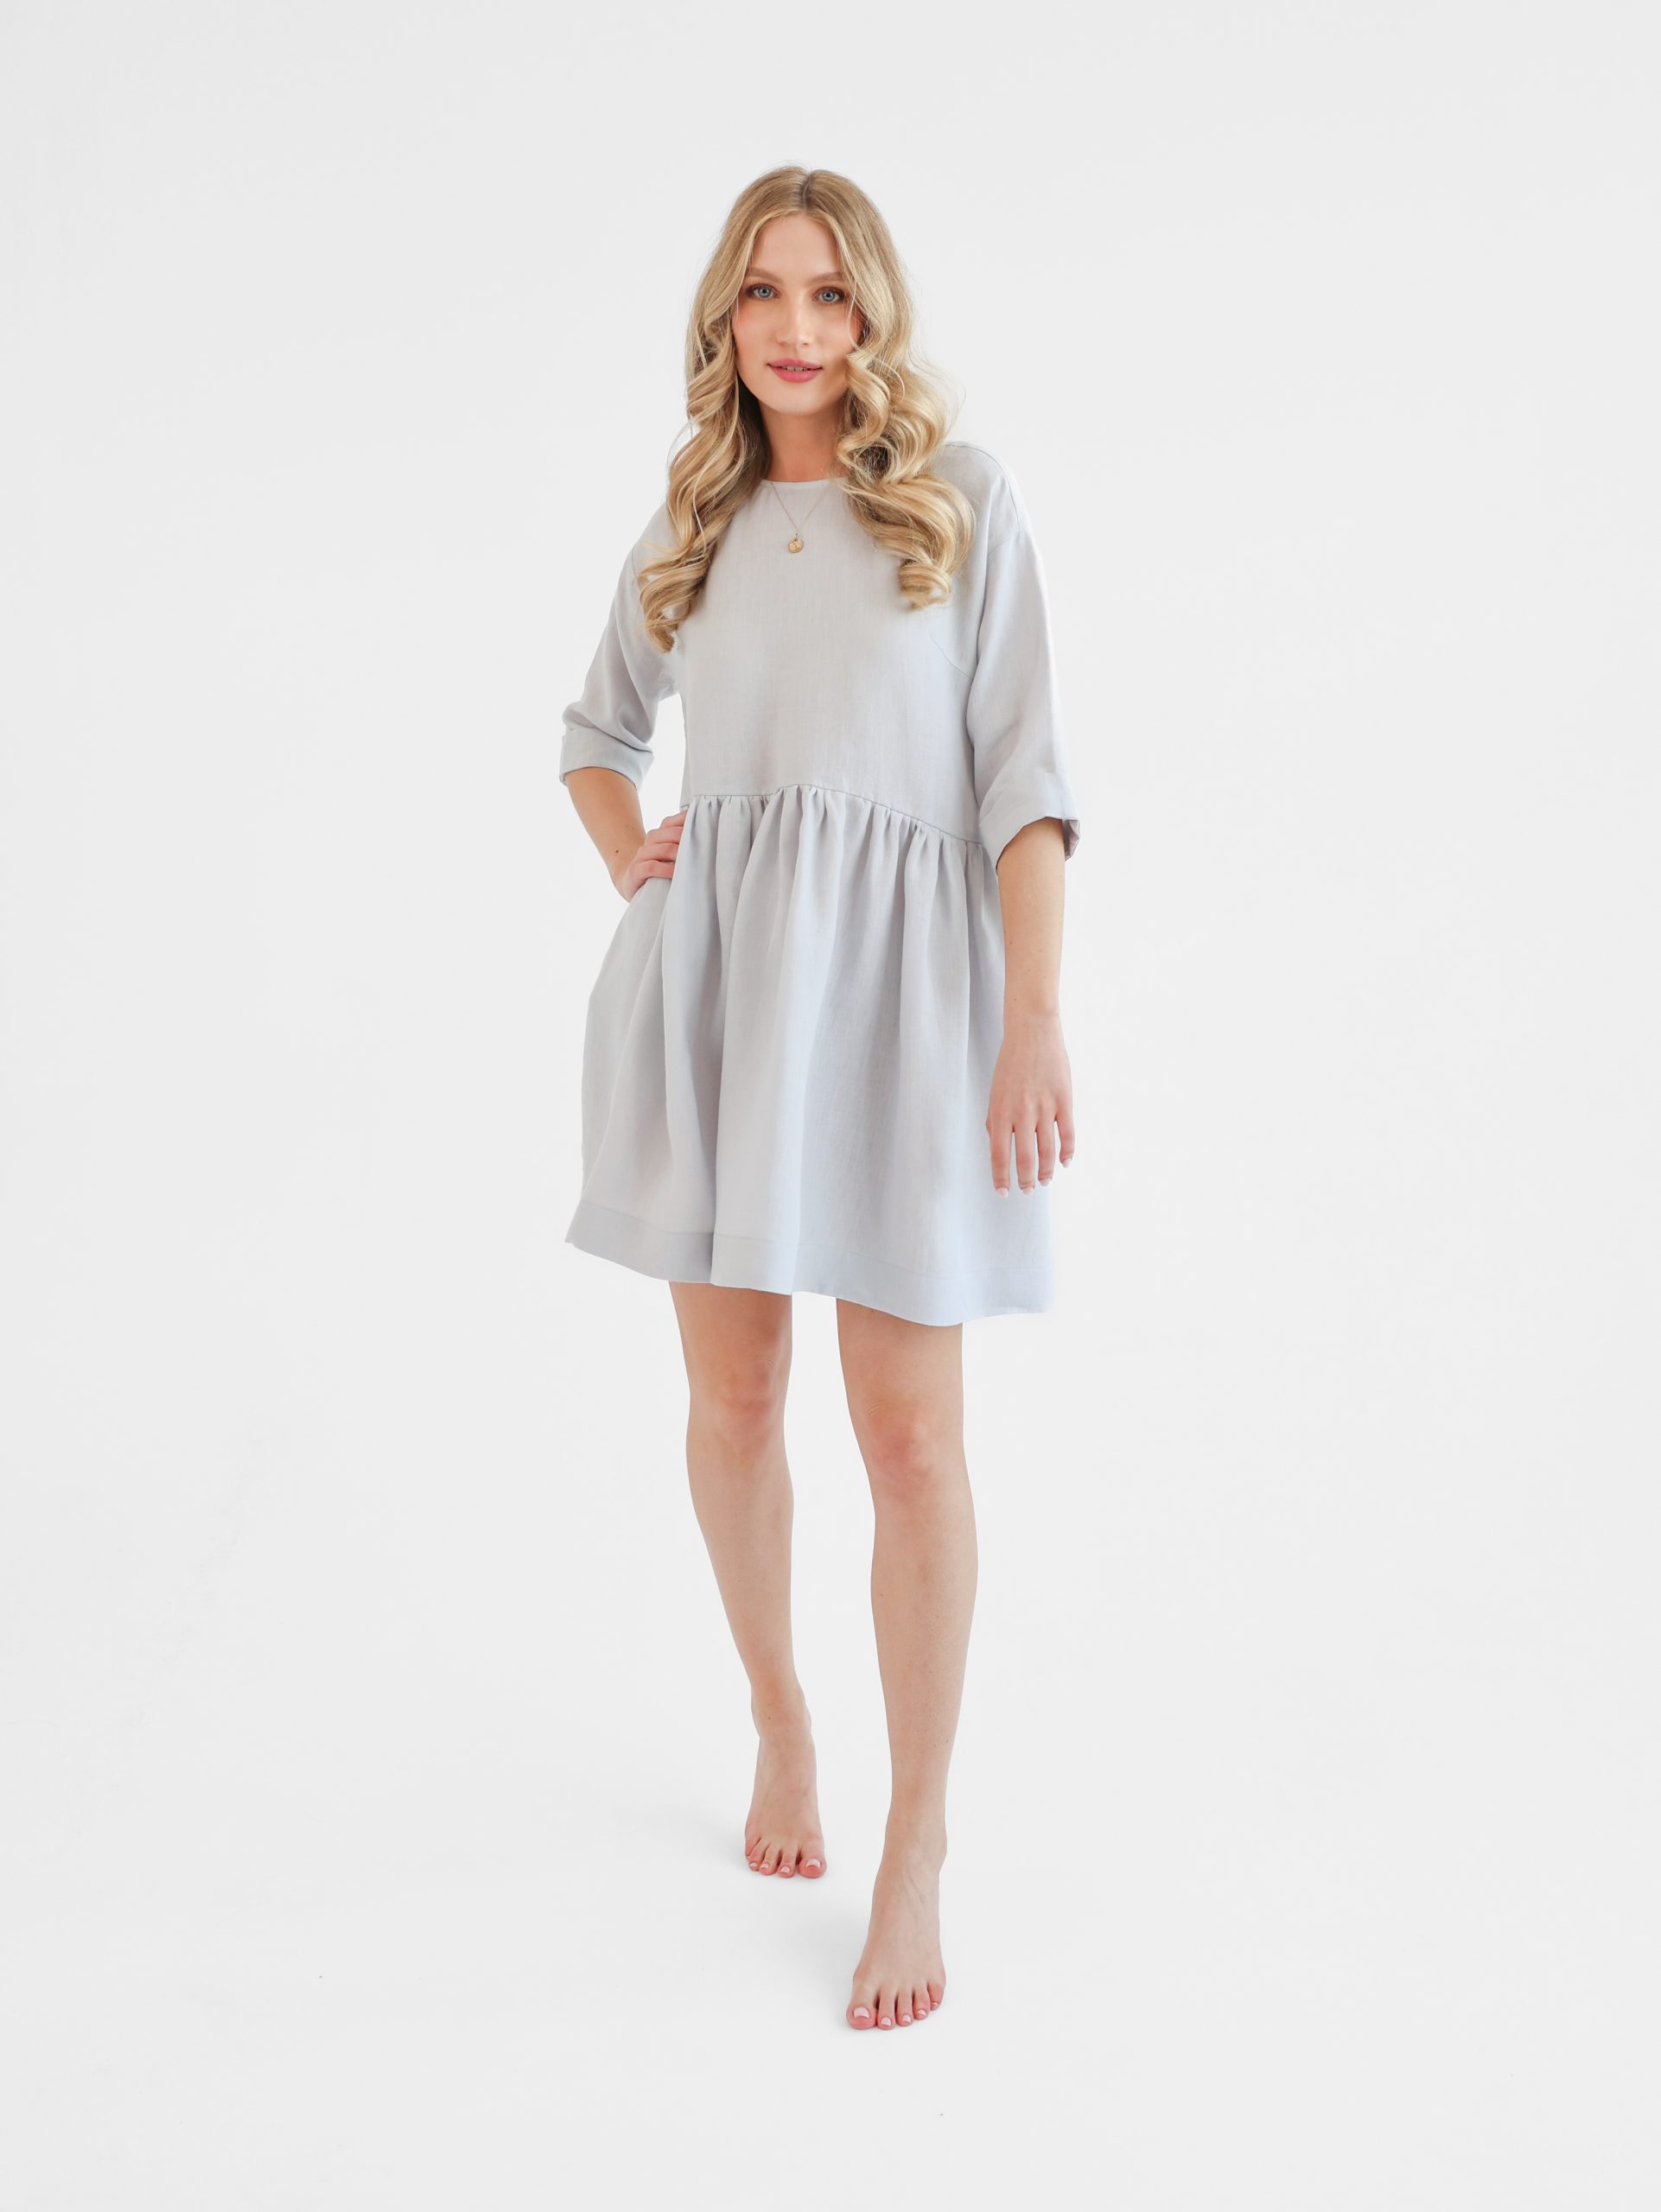 Linen dress with pockets